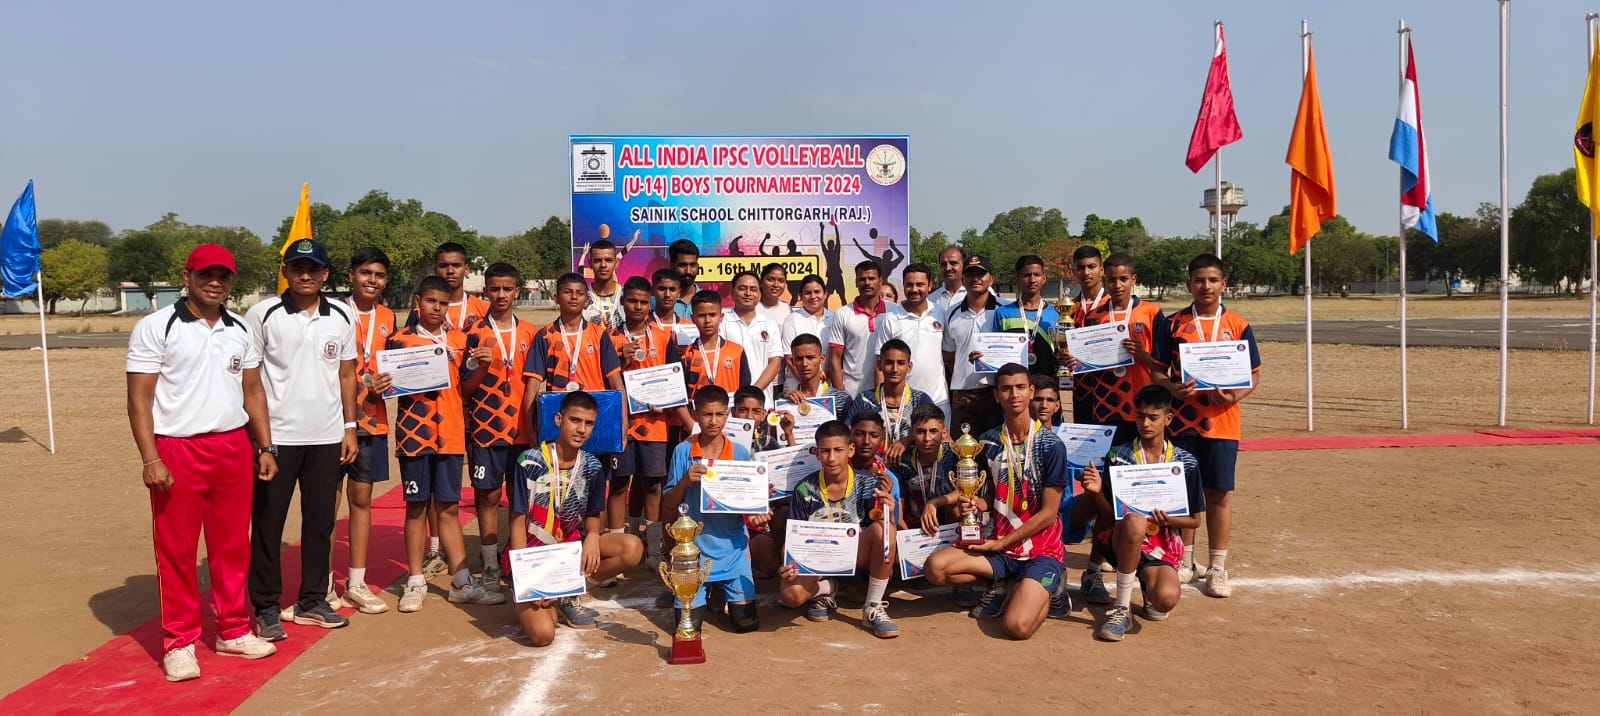 Closing Ceremony of All India IPSC Volleyball Tournament (U-14) 2024